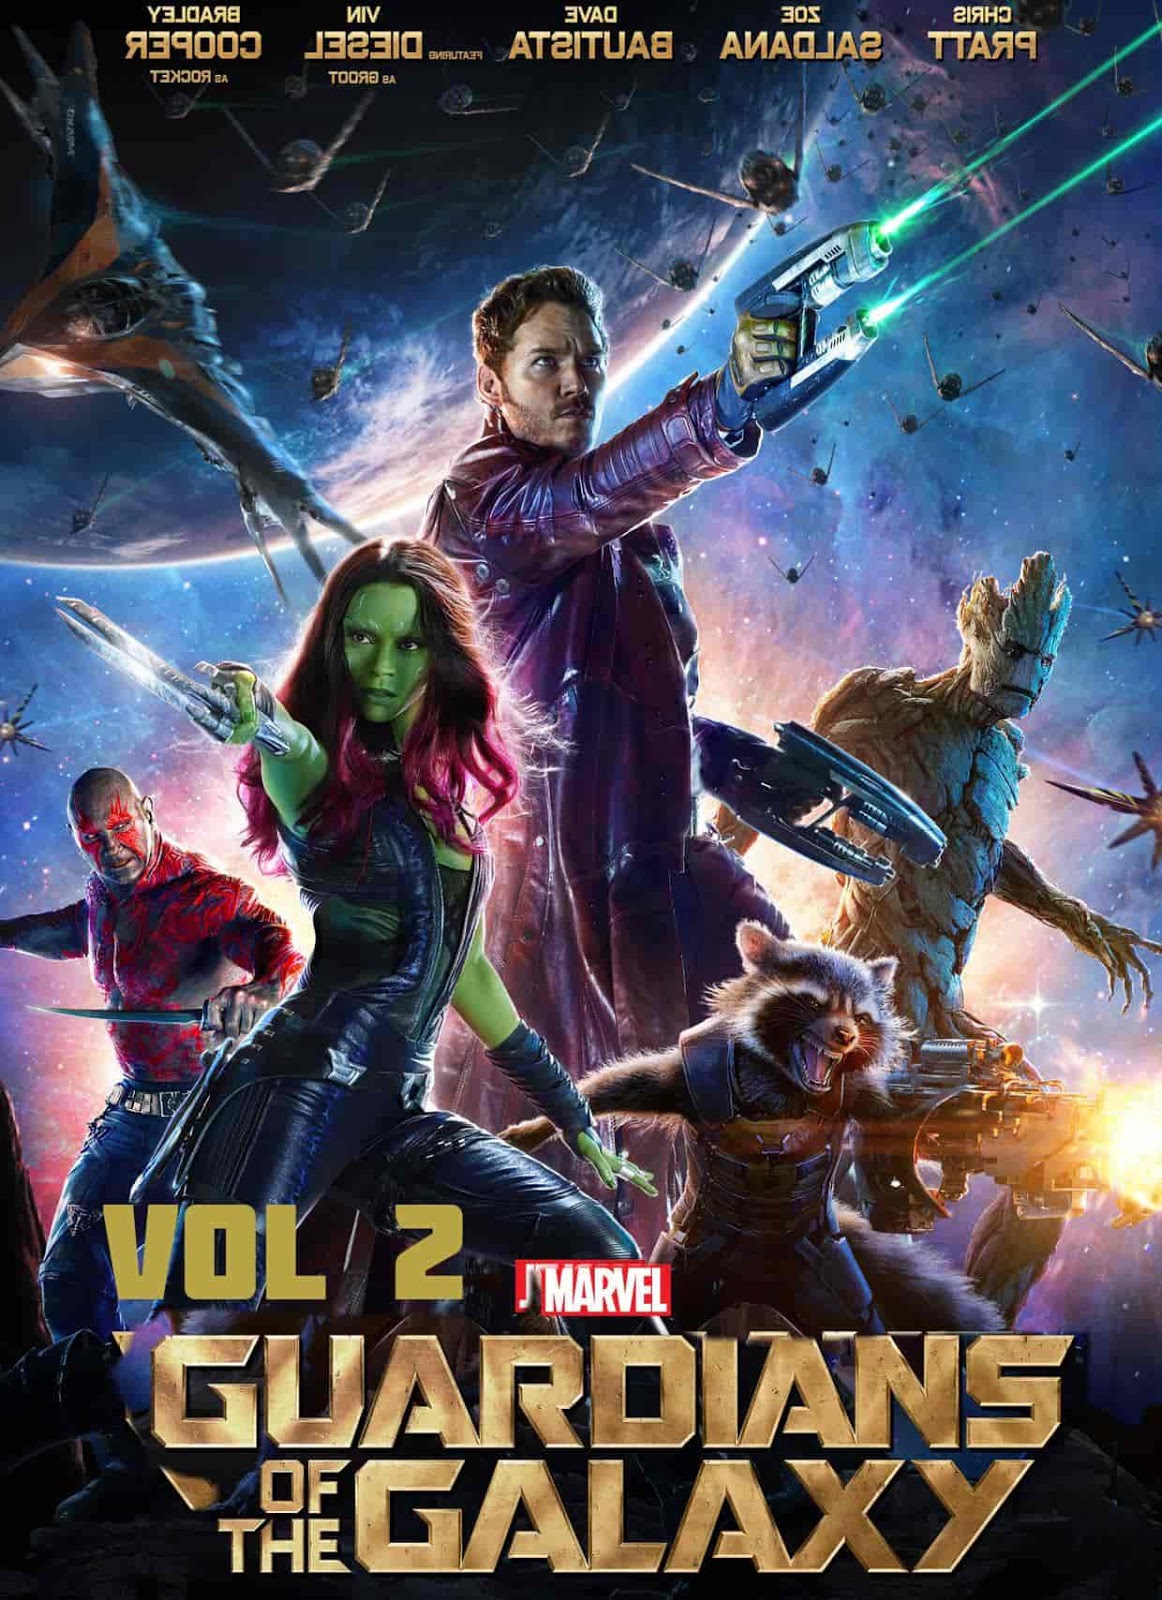 Guardians Full Movie In Hindi 2017 - Watch Guardians Of The Galaxy Vol